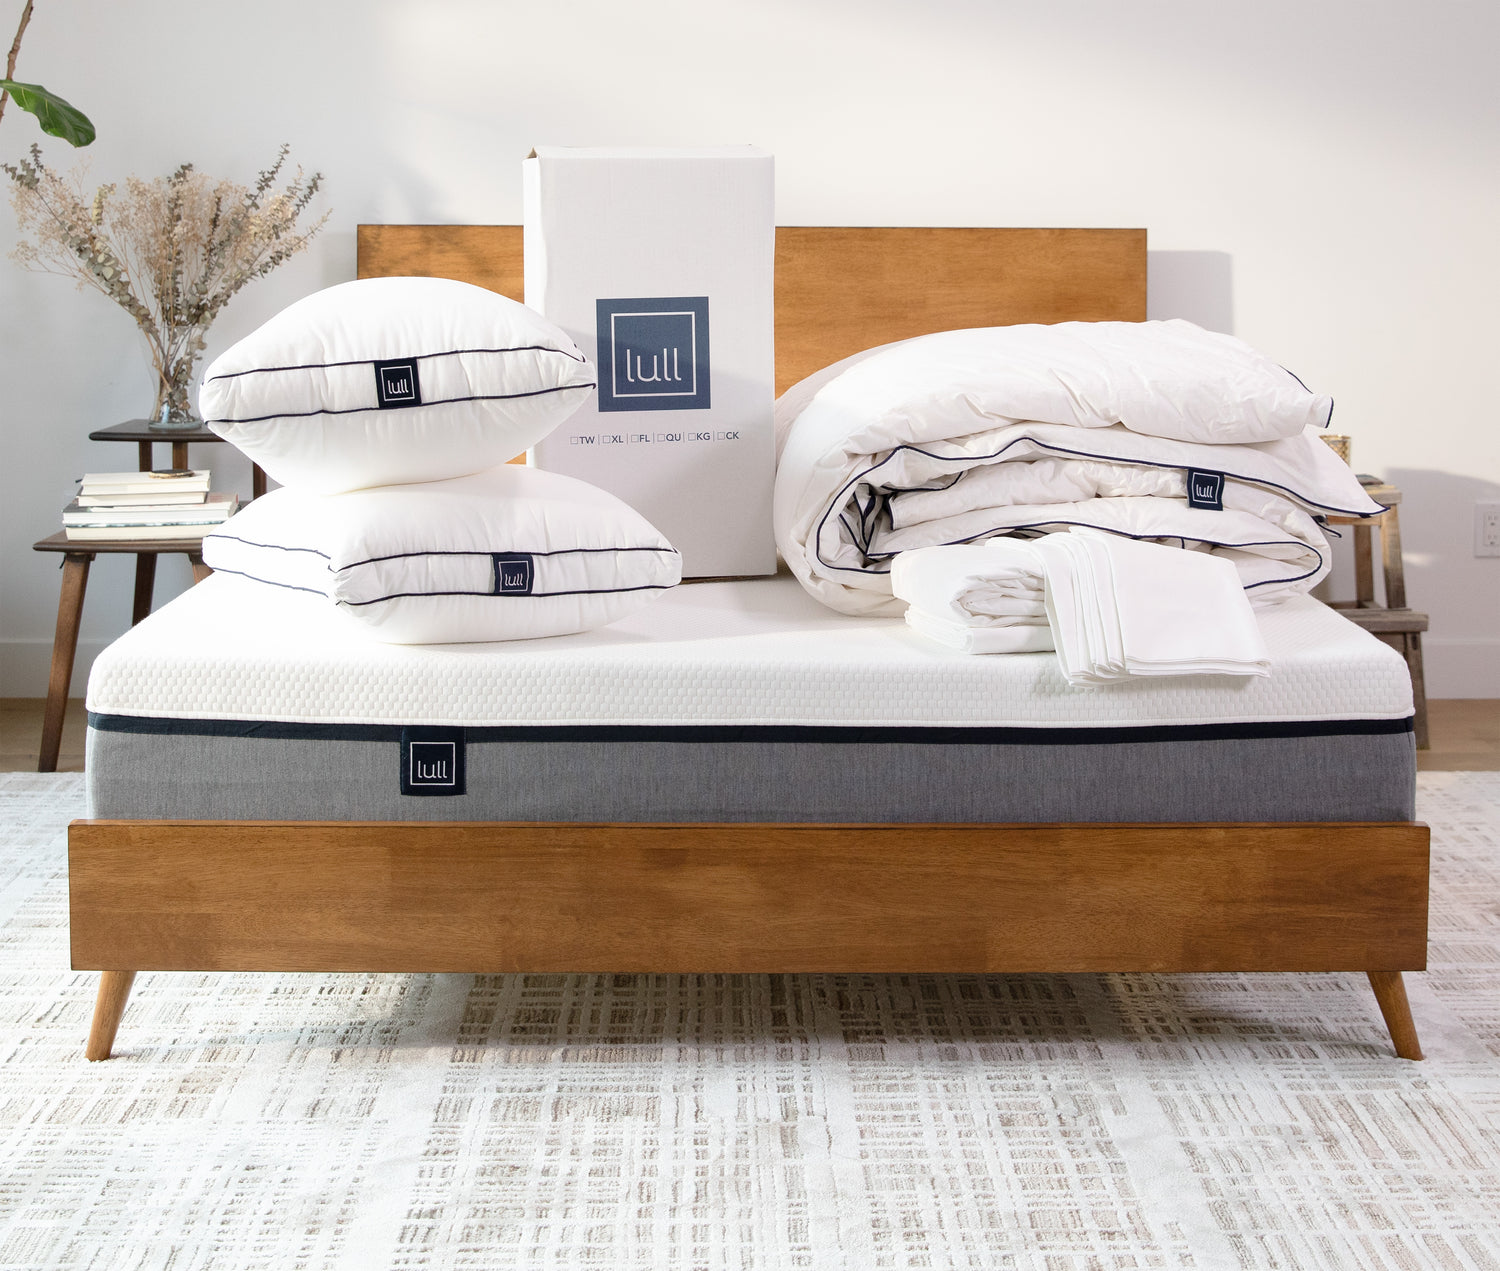 Several lull products including two lull pillows, a lull duvet, and lull sheets sitting on top of a lull mattress.